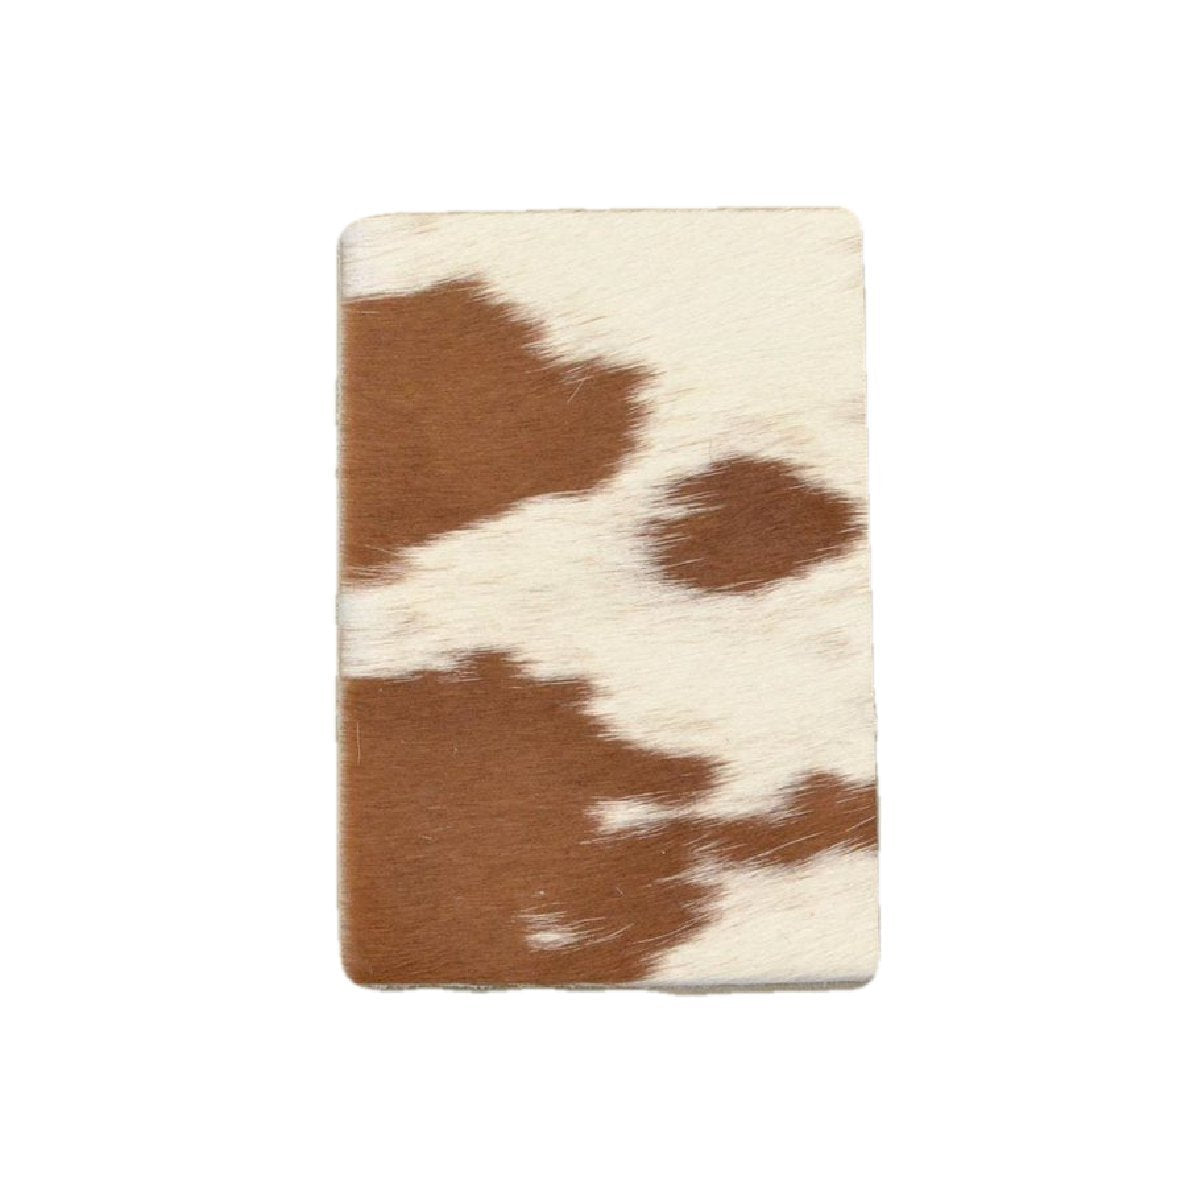 Bi-Color Medium Brown and Off-White Hair on Cow Hide Pre-cut, 4 x 6 | The Leather Guy